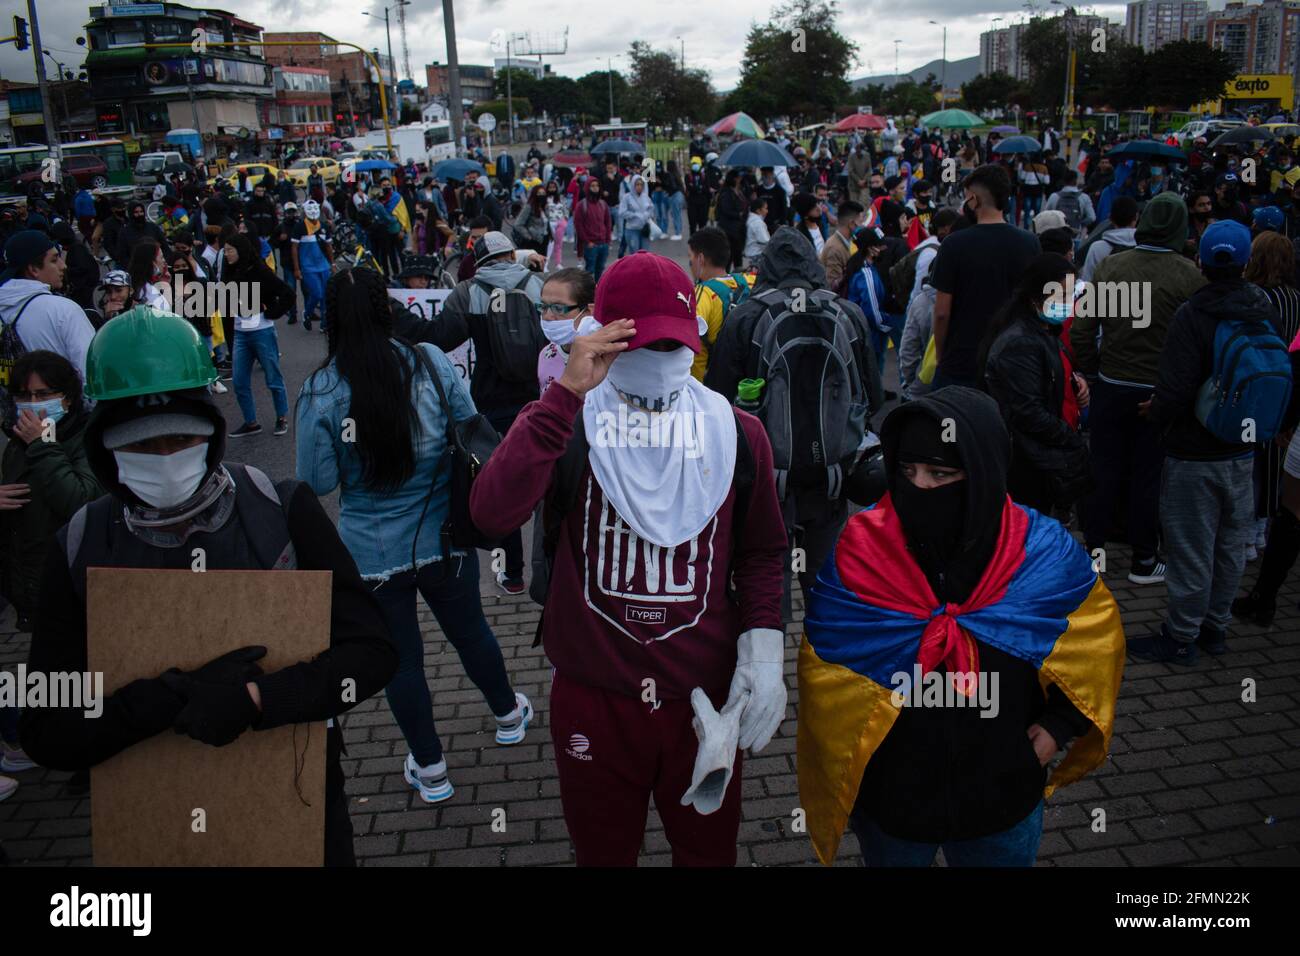 Bogota, Colombia, May 10, 2021, Bogota faces its 13 day of anti-government protests against the Health Reform and Police Brutality cases that rise to over 30 dead across the country since the National Strike begun. In Bogota, Colombia on May 10, 2021 Stock Photo